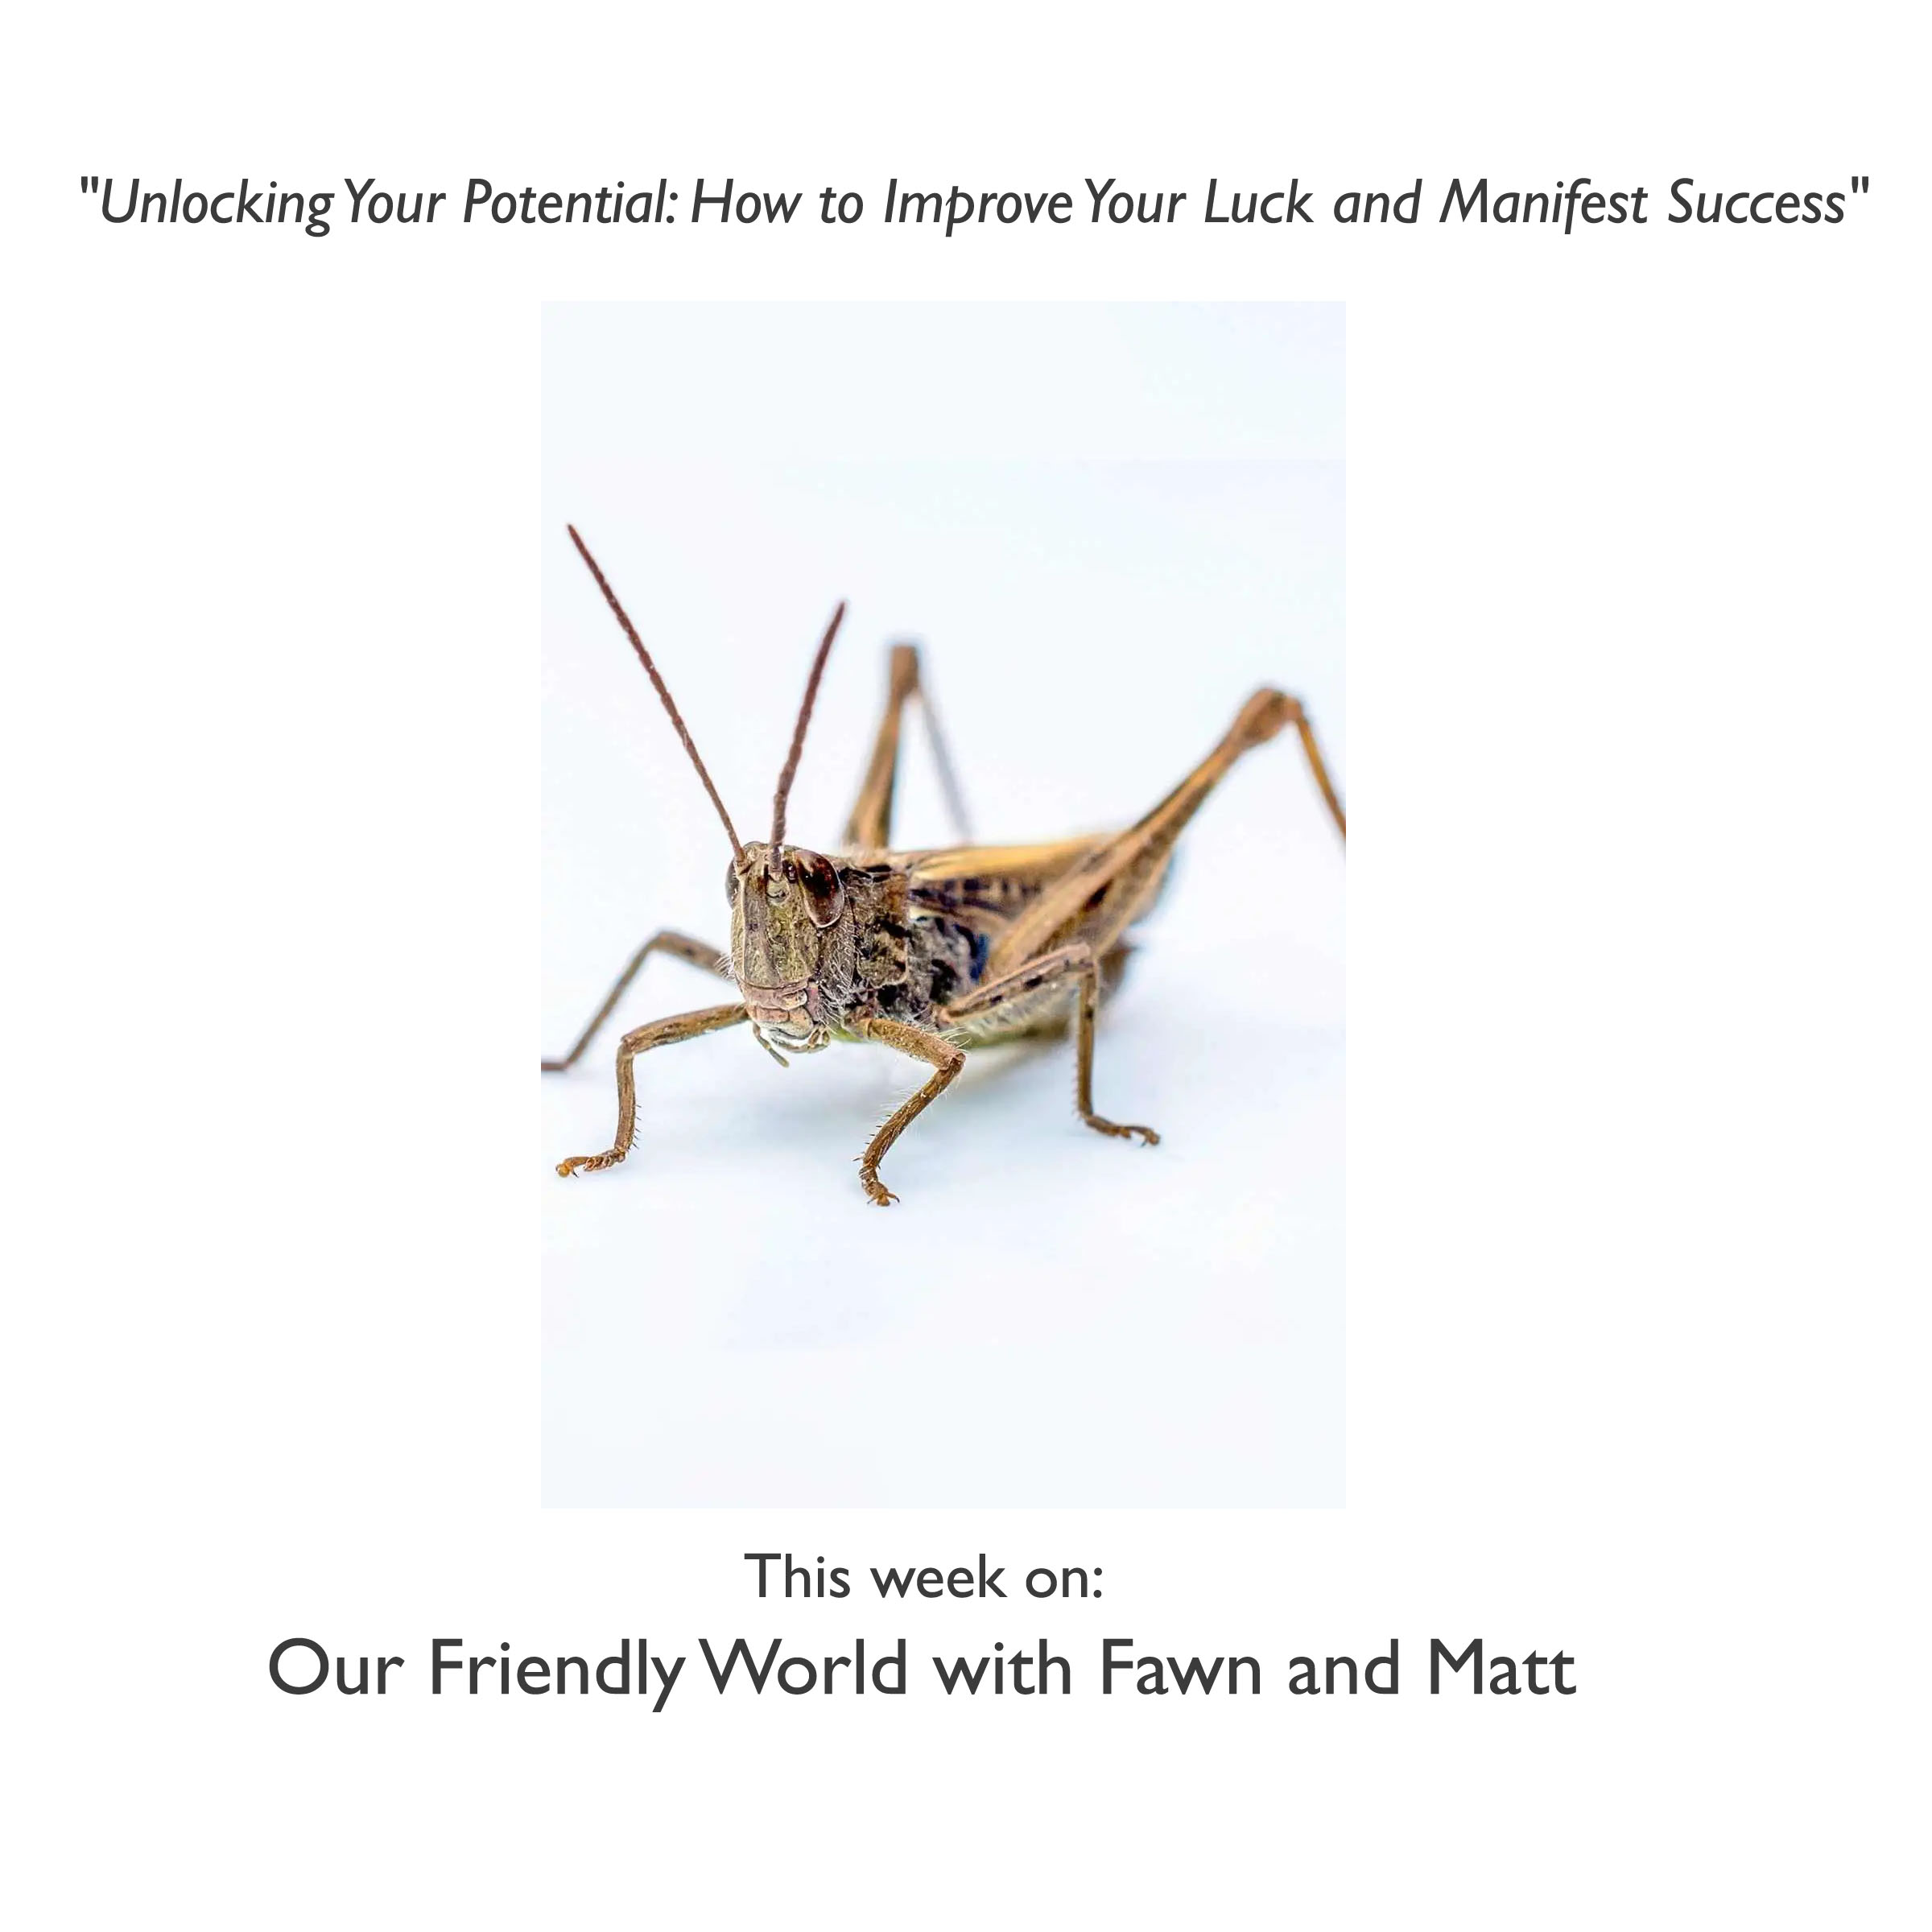 "Unlocking Your Potential: How to Improve Your Luck and Manifest Success"